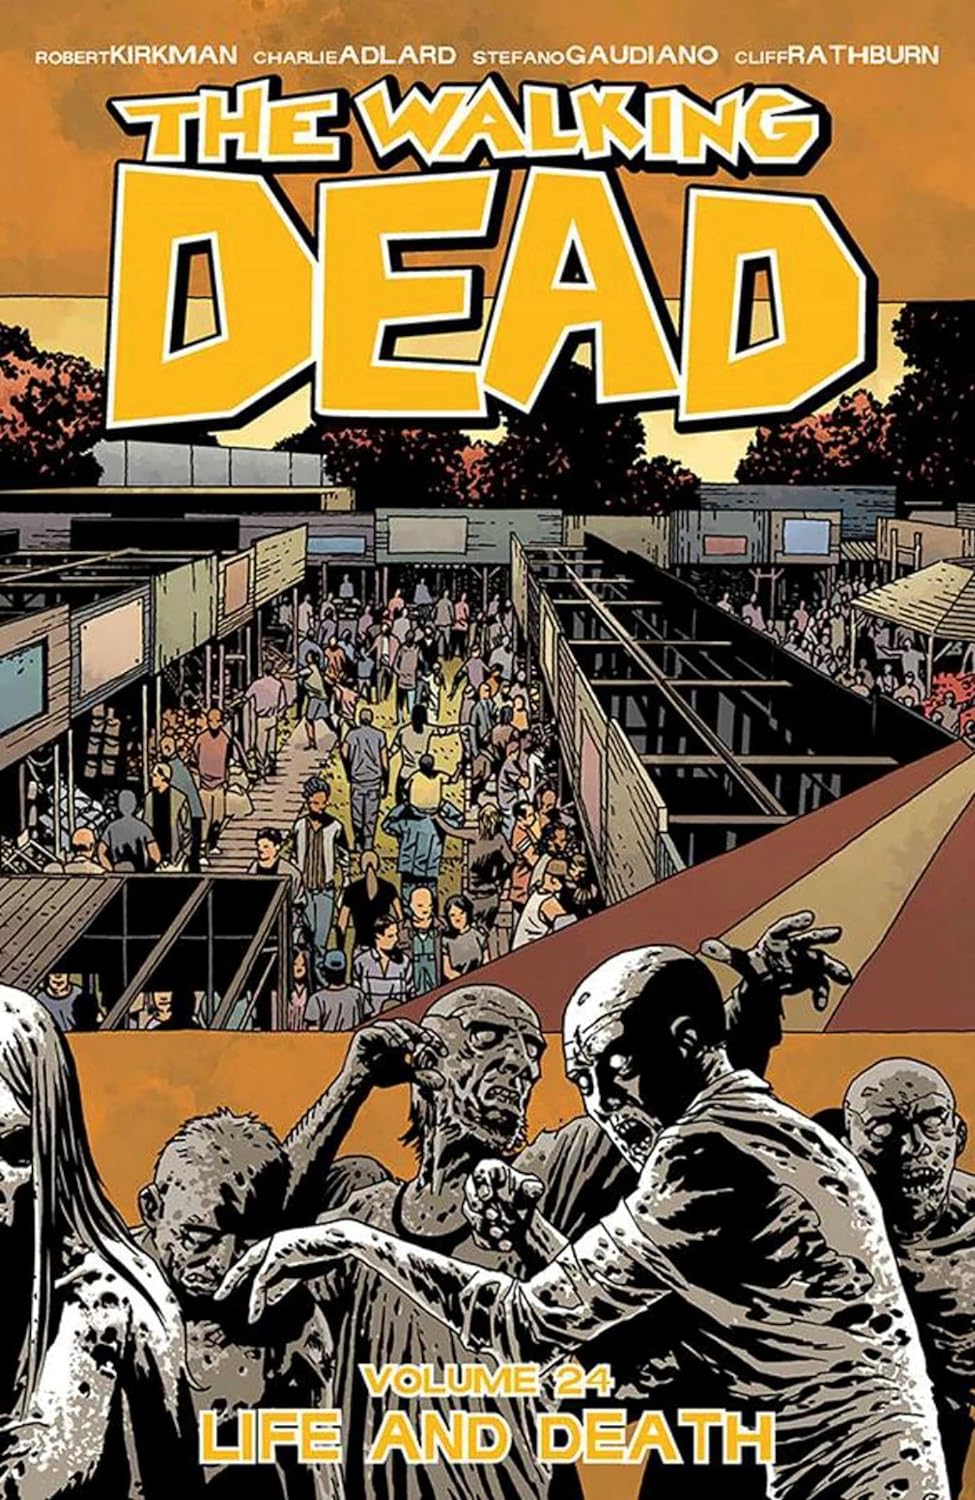 The Walking Dead Vol. 24: Life and Death TP 2015